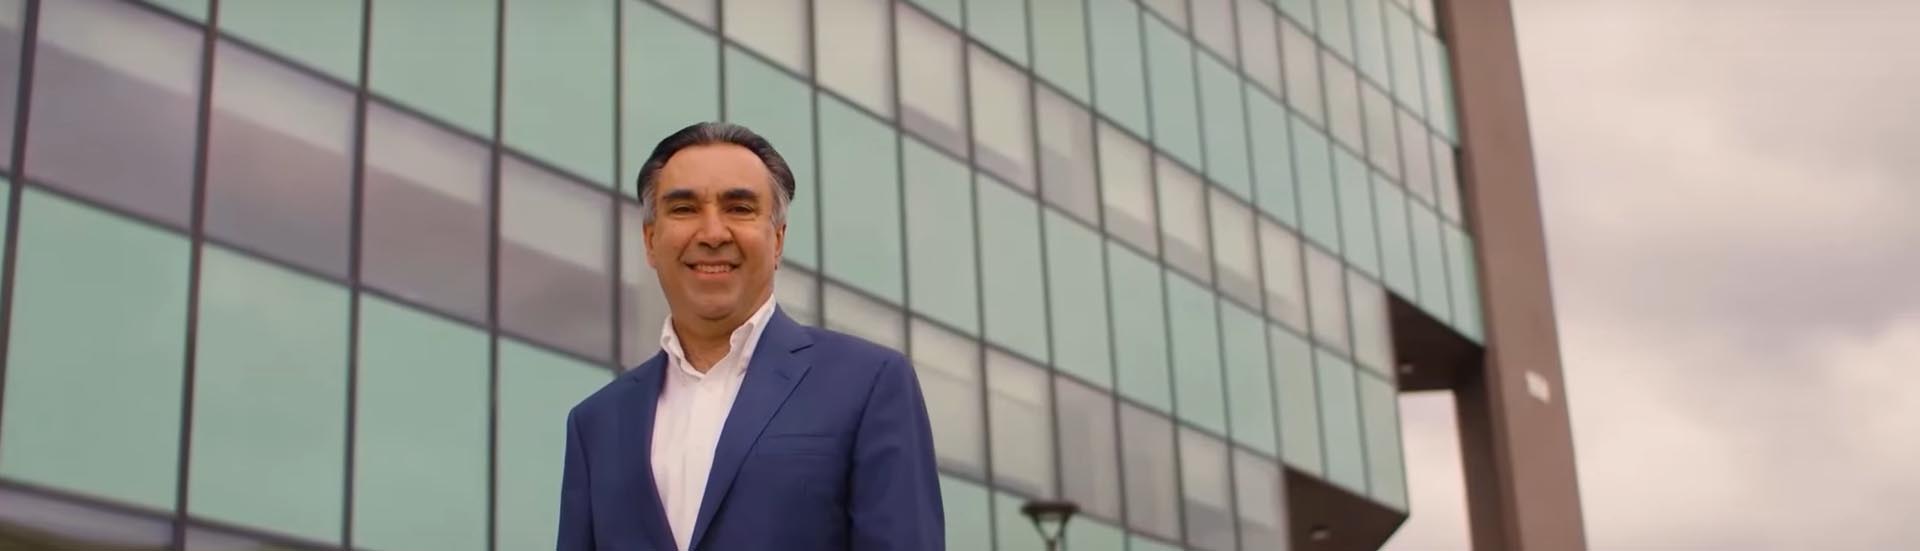 Dr. Sanjeev Arora outside the Project ECHO building